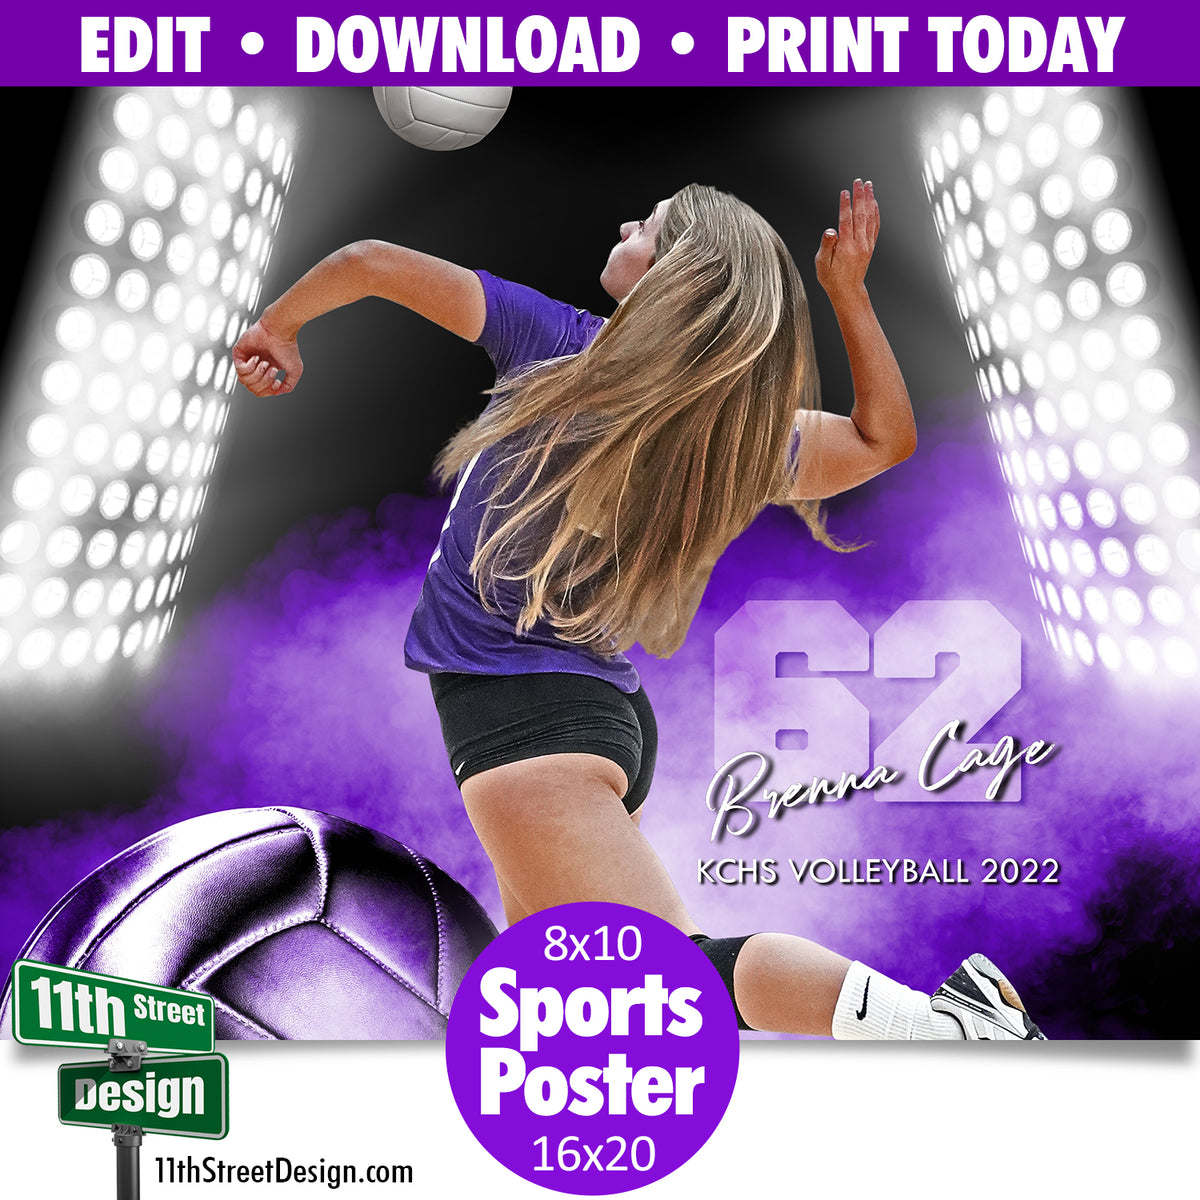 Sports Poster • Edit Now Online • Print Today • Digital Download • Custom Sports Photos • Senior Day Night Poster • Smokey Lights Volleyball Template